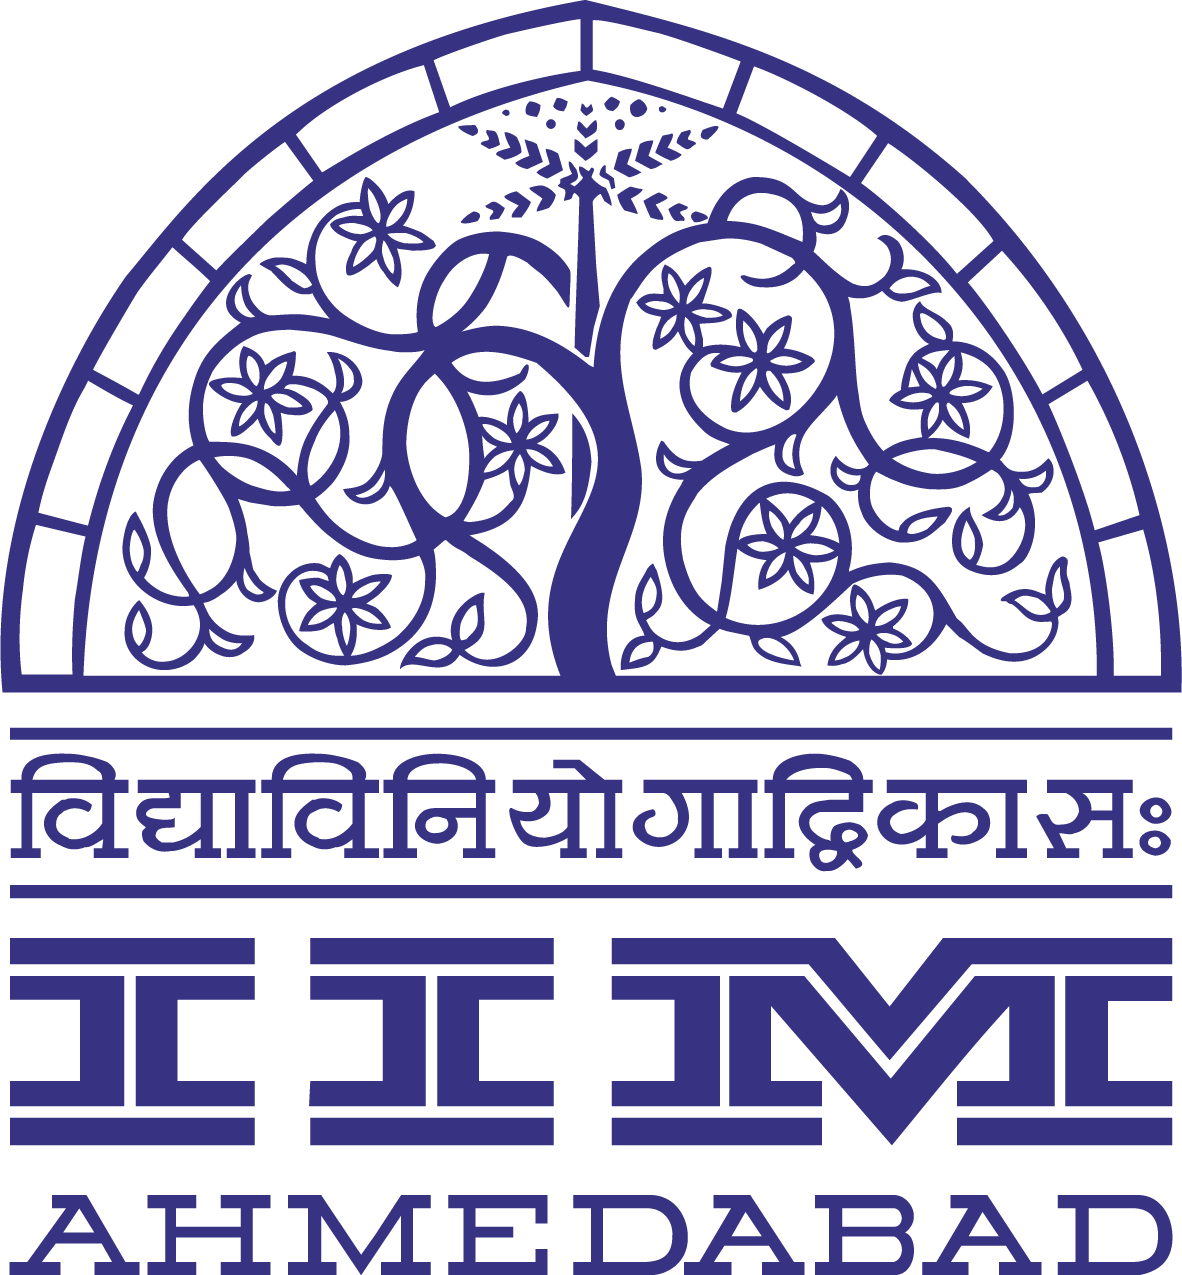 Why is IIM Ahmedabad ignoring the caste reality of India?